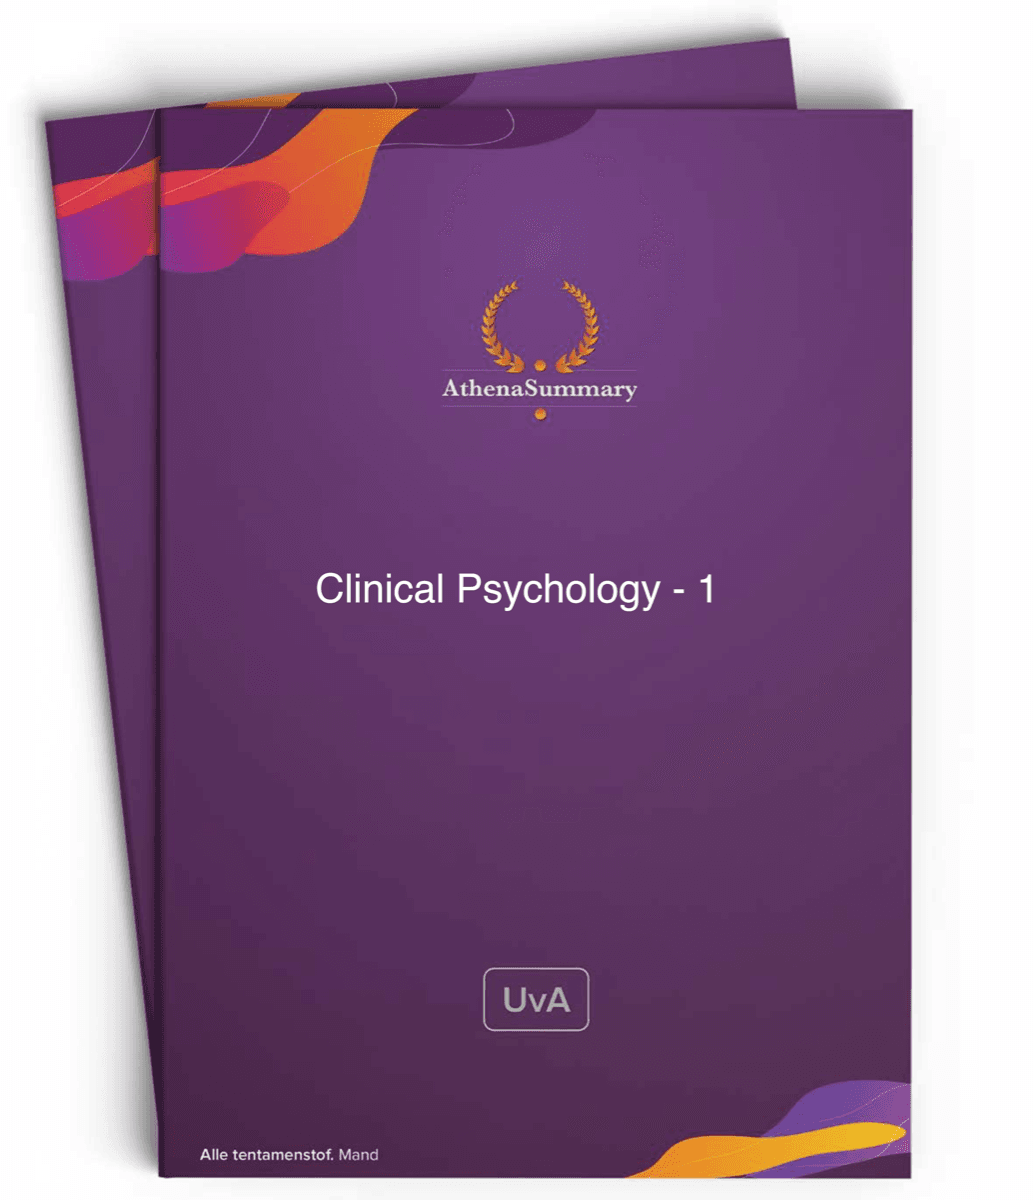 Literature Summary: Clinical Psychology - 1